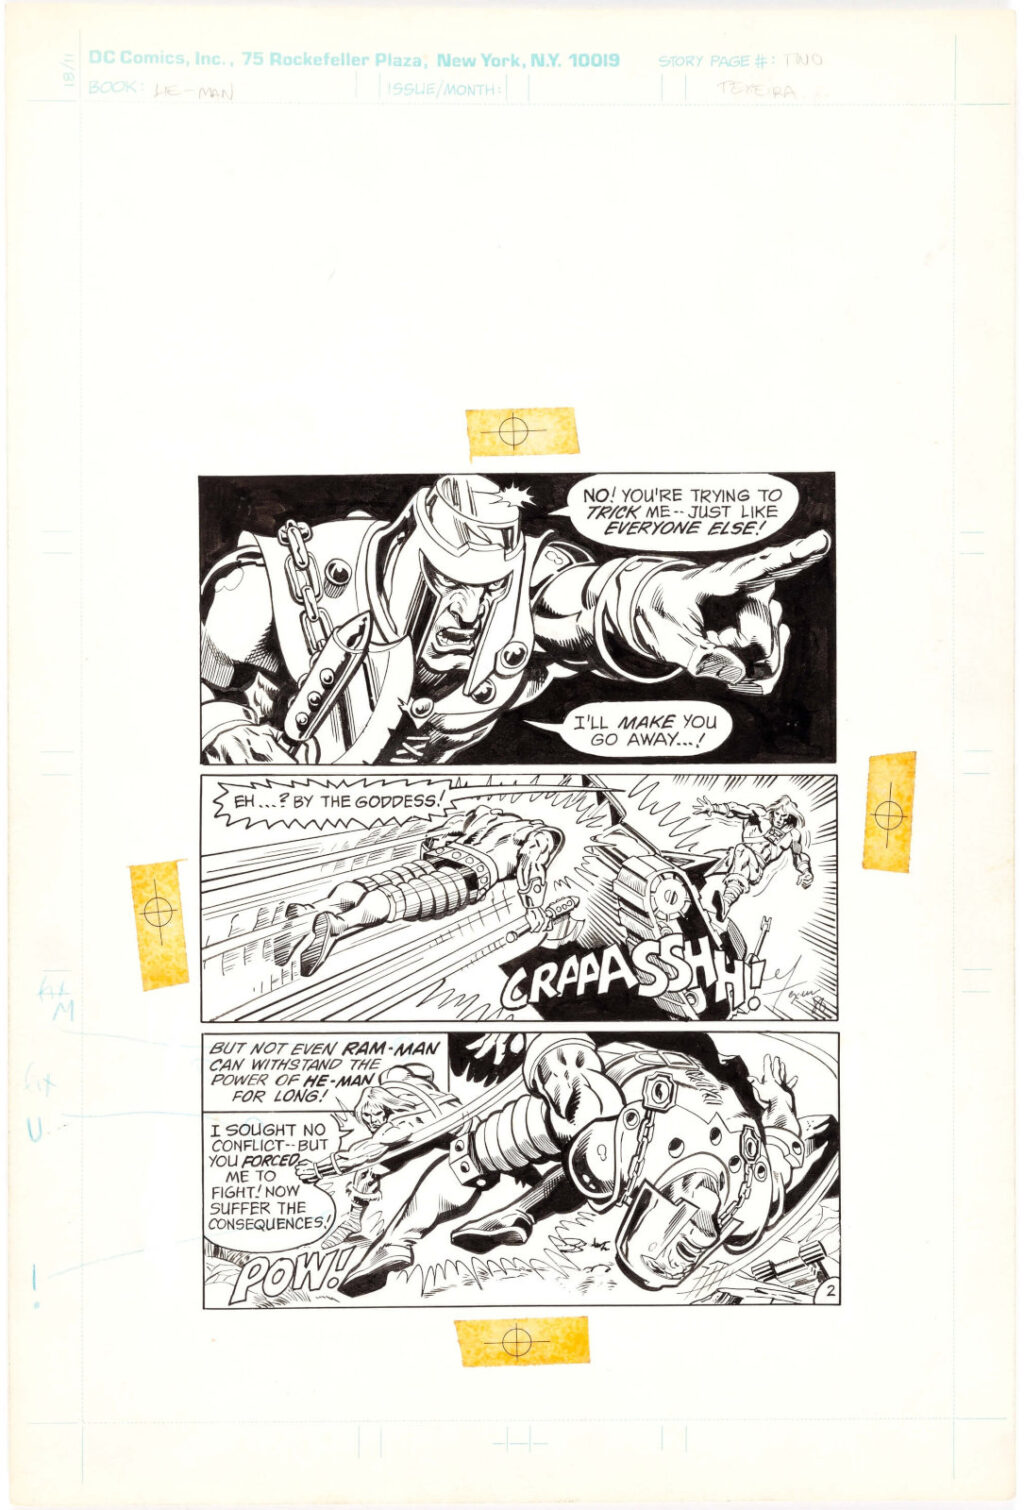 Master Of The Universe He Man Meets Ram Man page 2 by Mark Texeira and Tod Smith